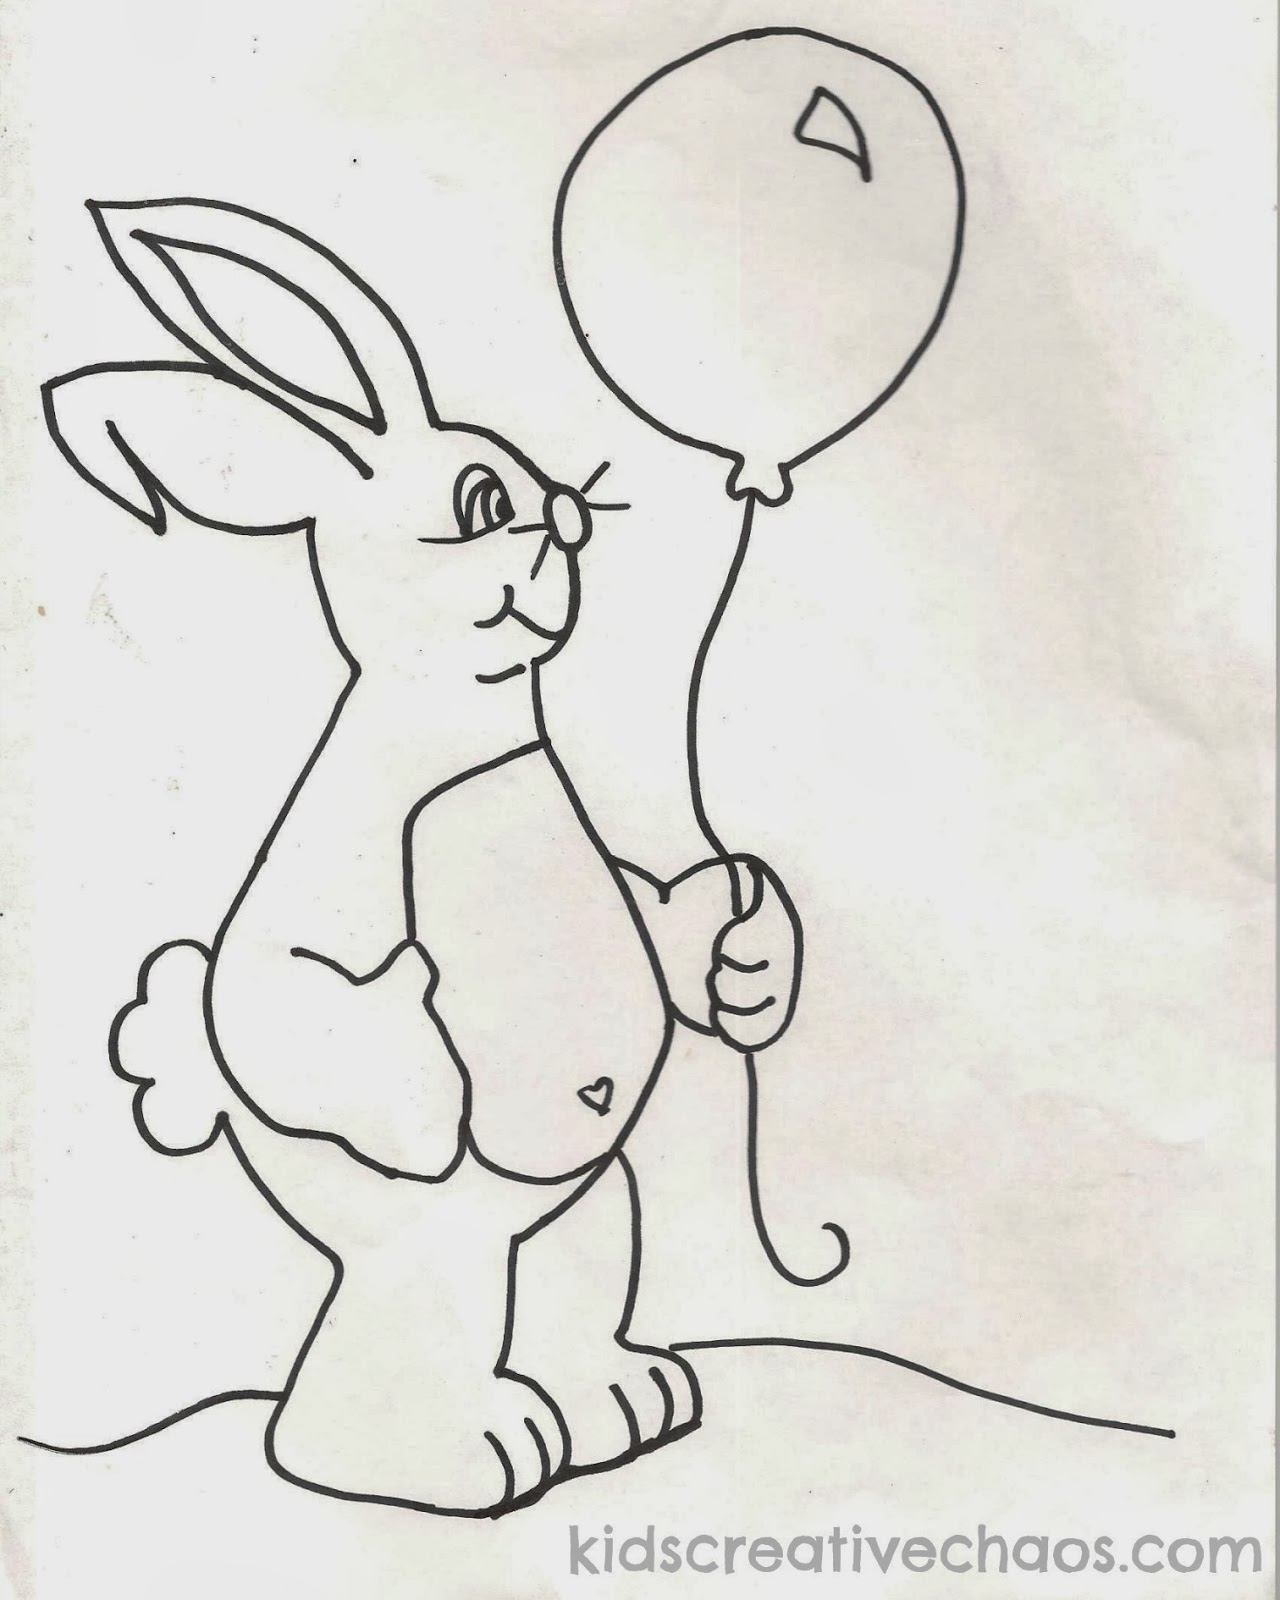 Bunny to color with balloon.